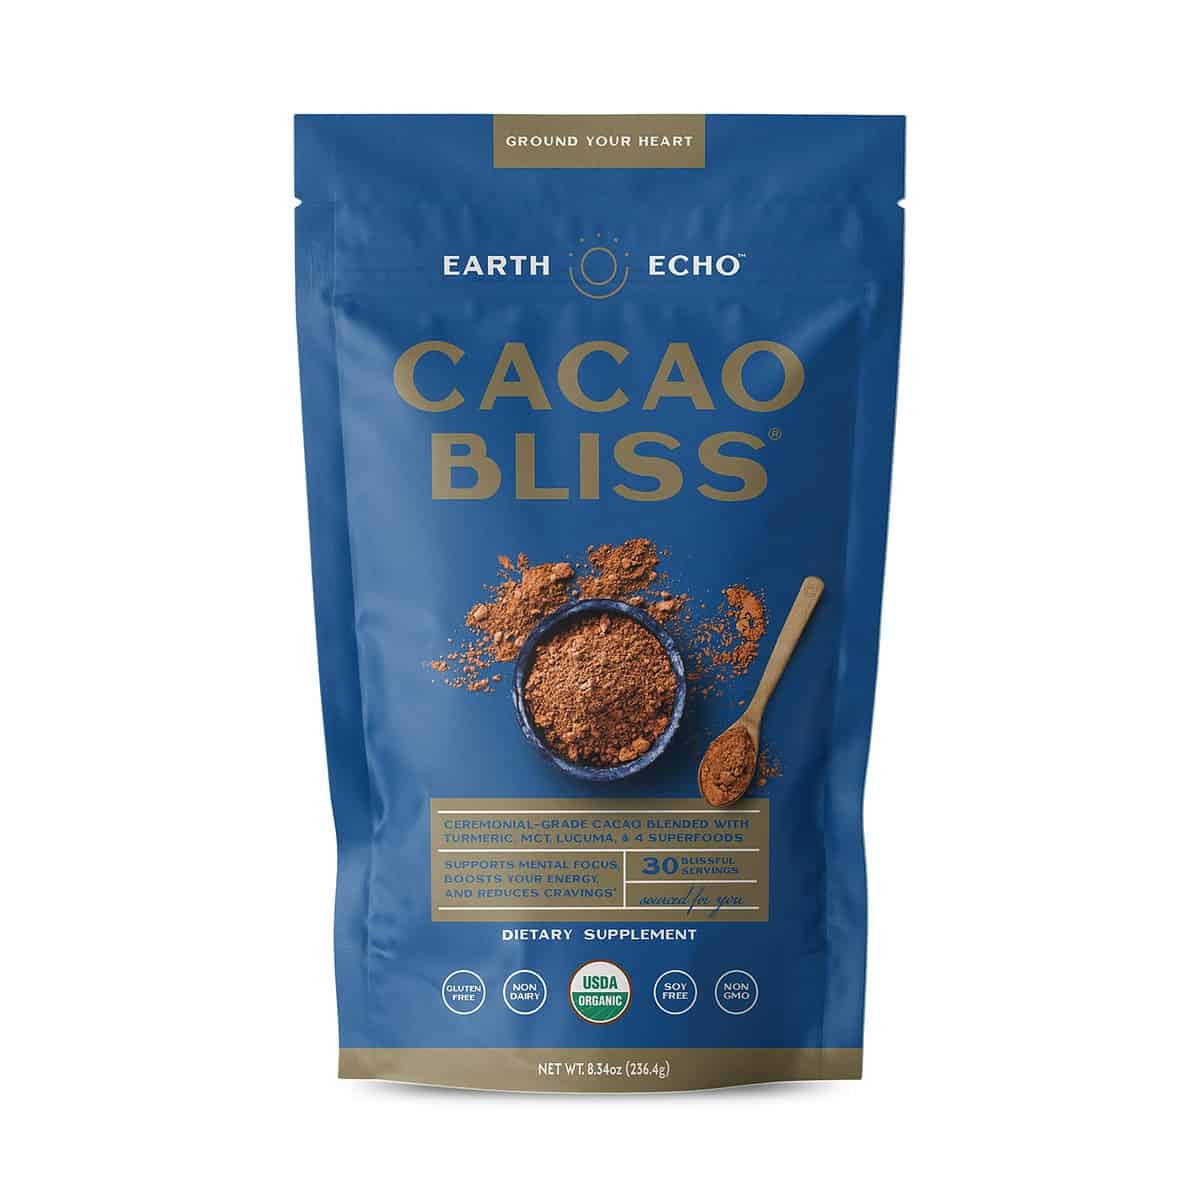 Cacao Bliss Review – A Healthy Alternative For Your Chocolate Cravings